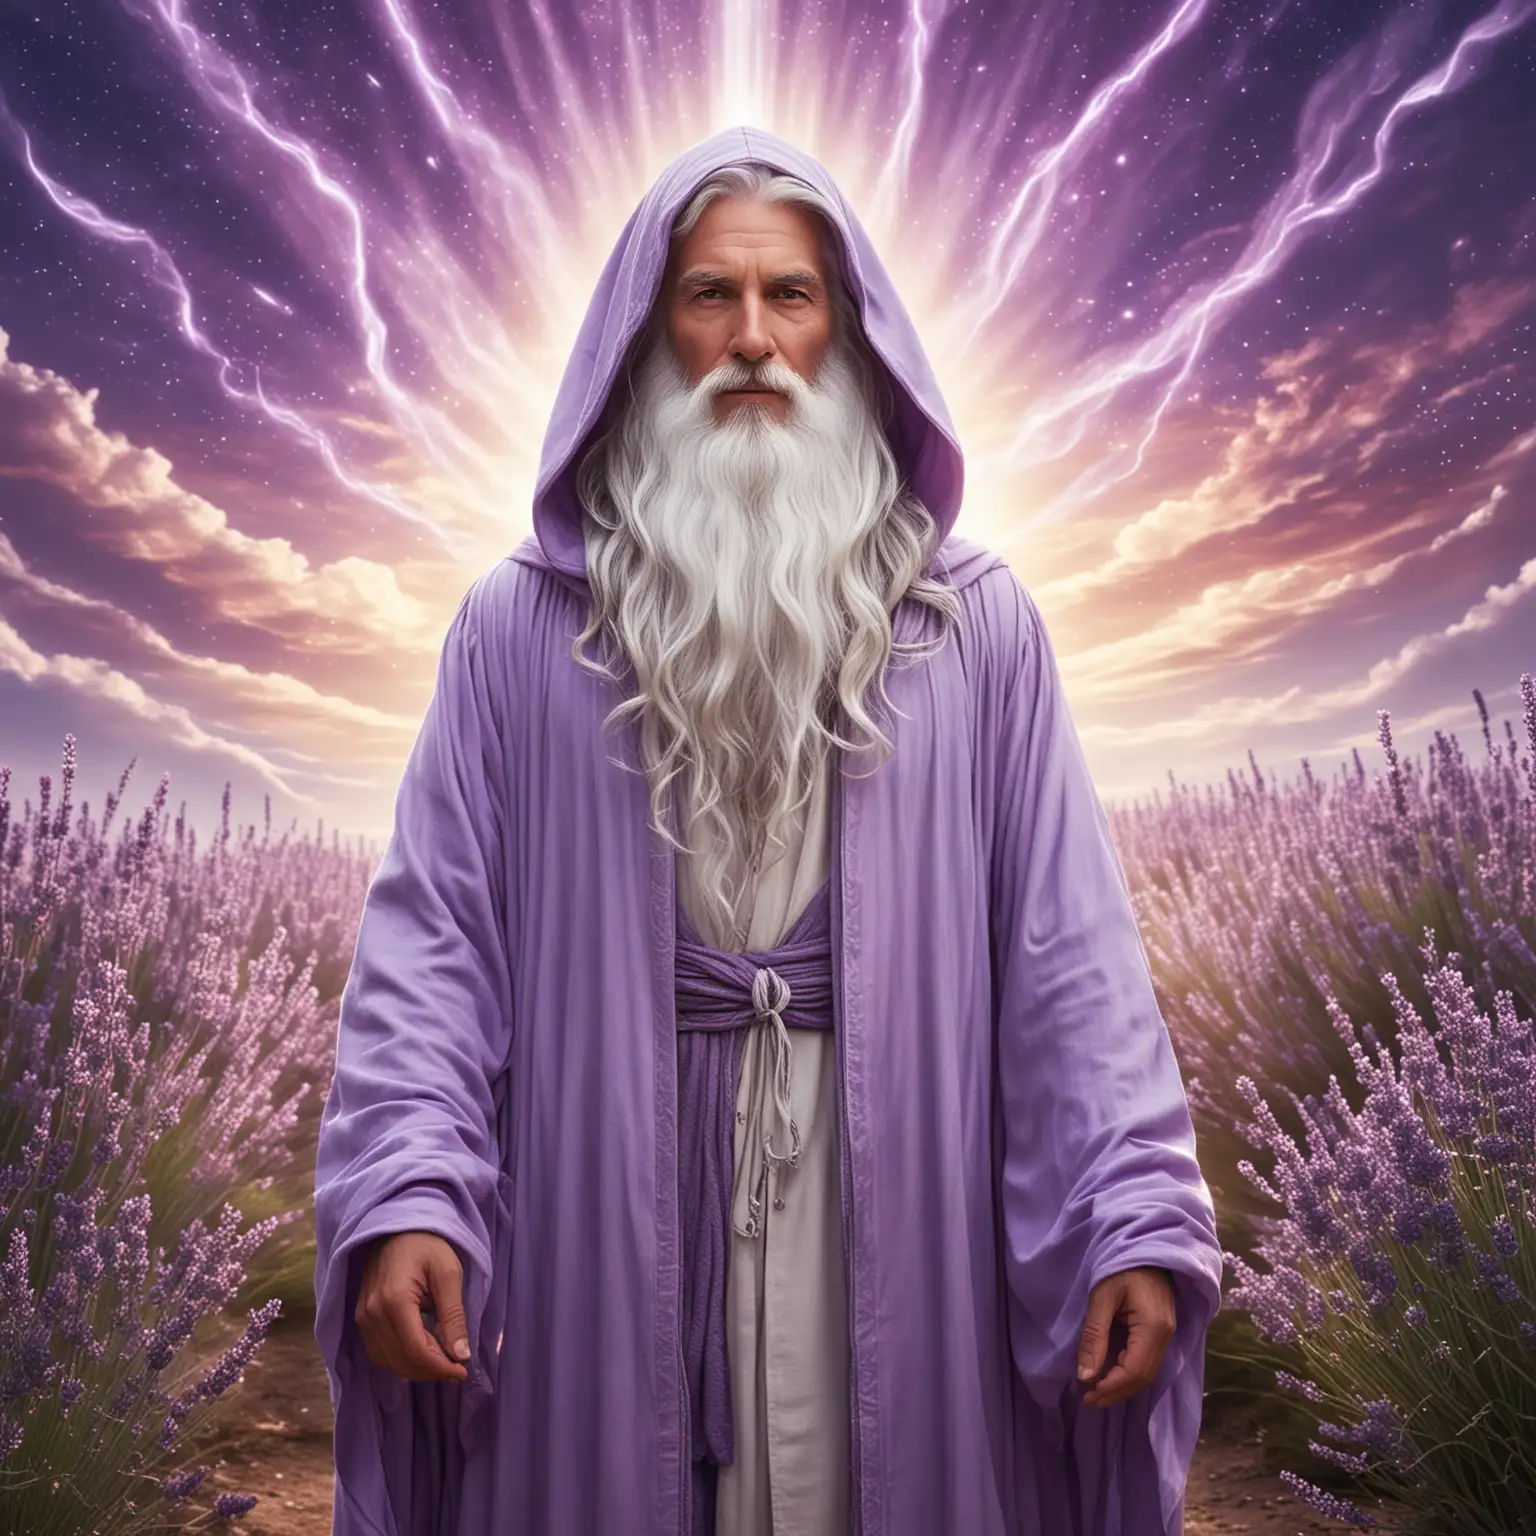 Mystical Galactic Wizard in Lavender Robe with Radiant Light